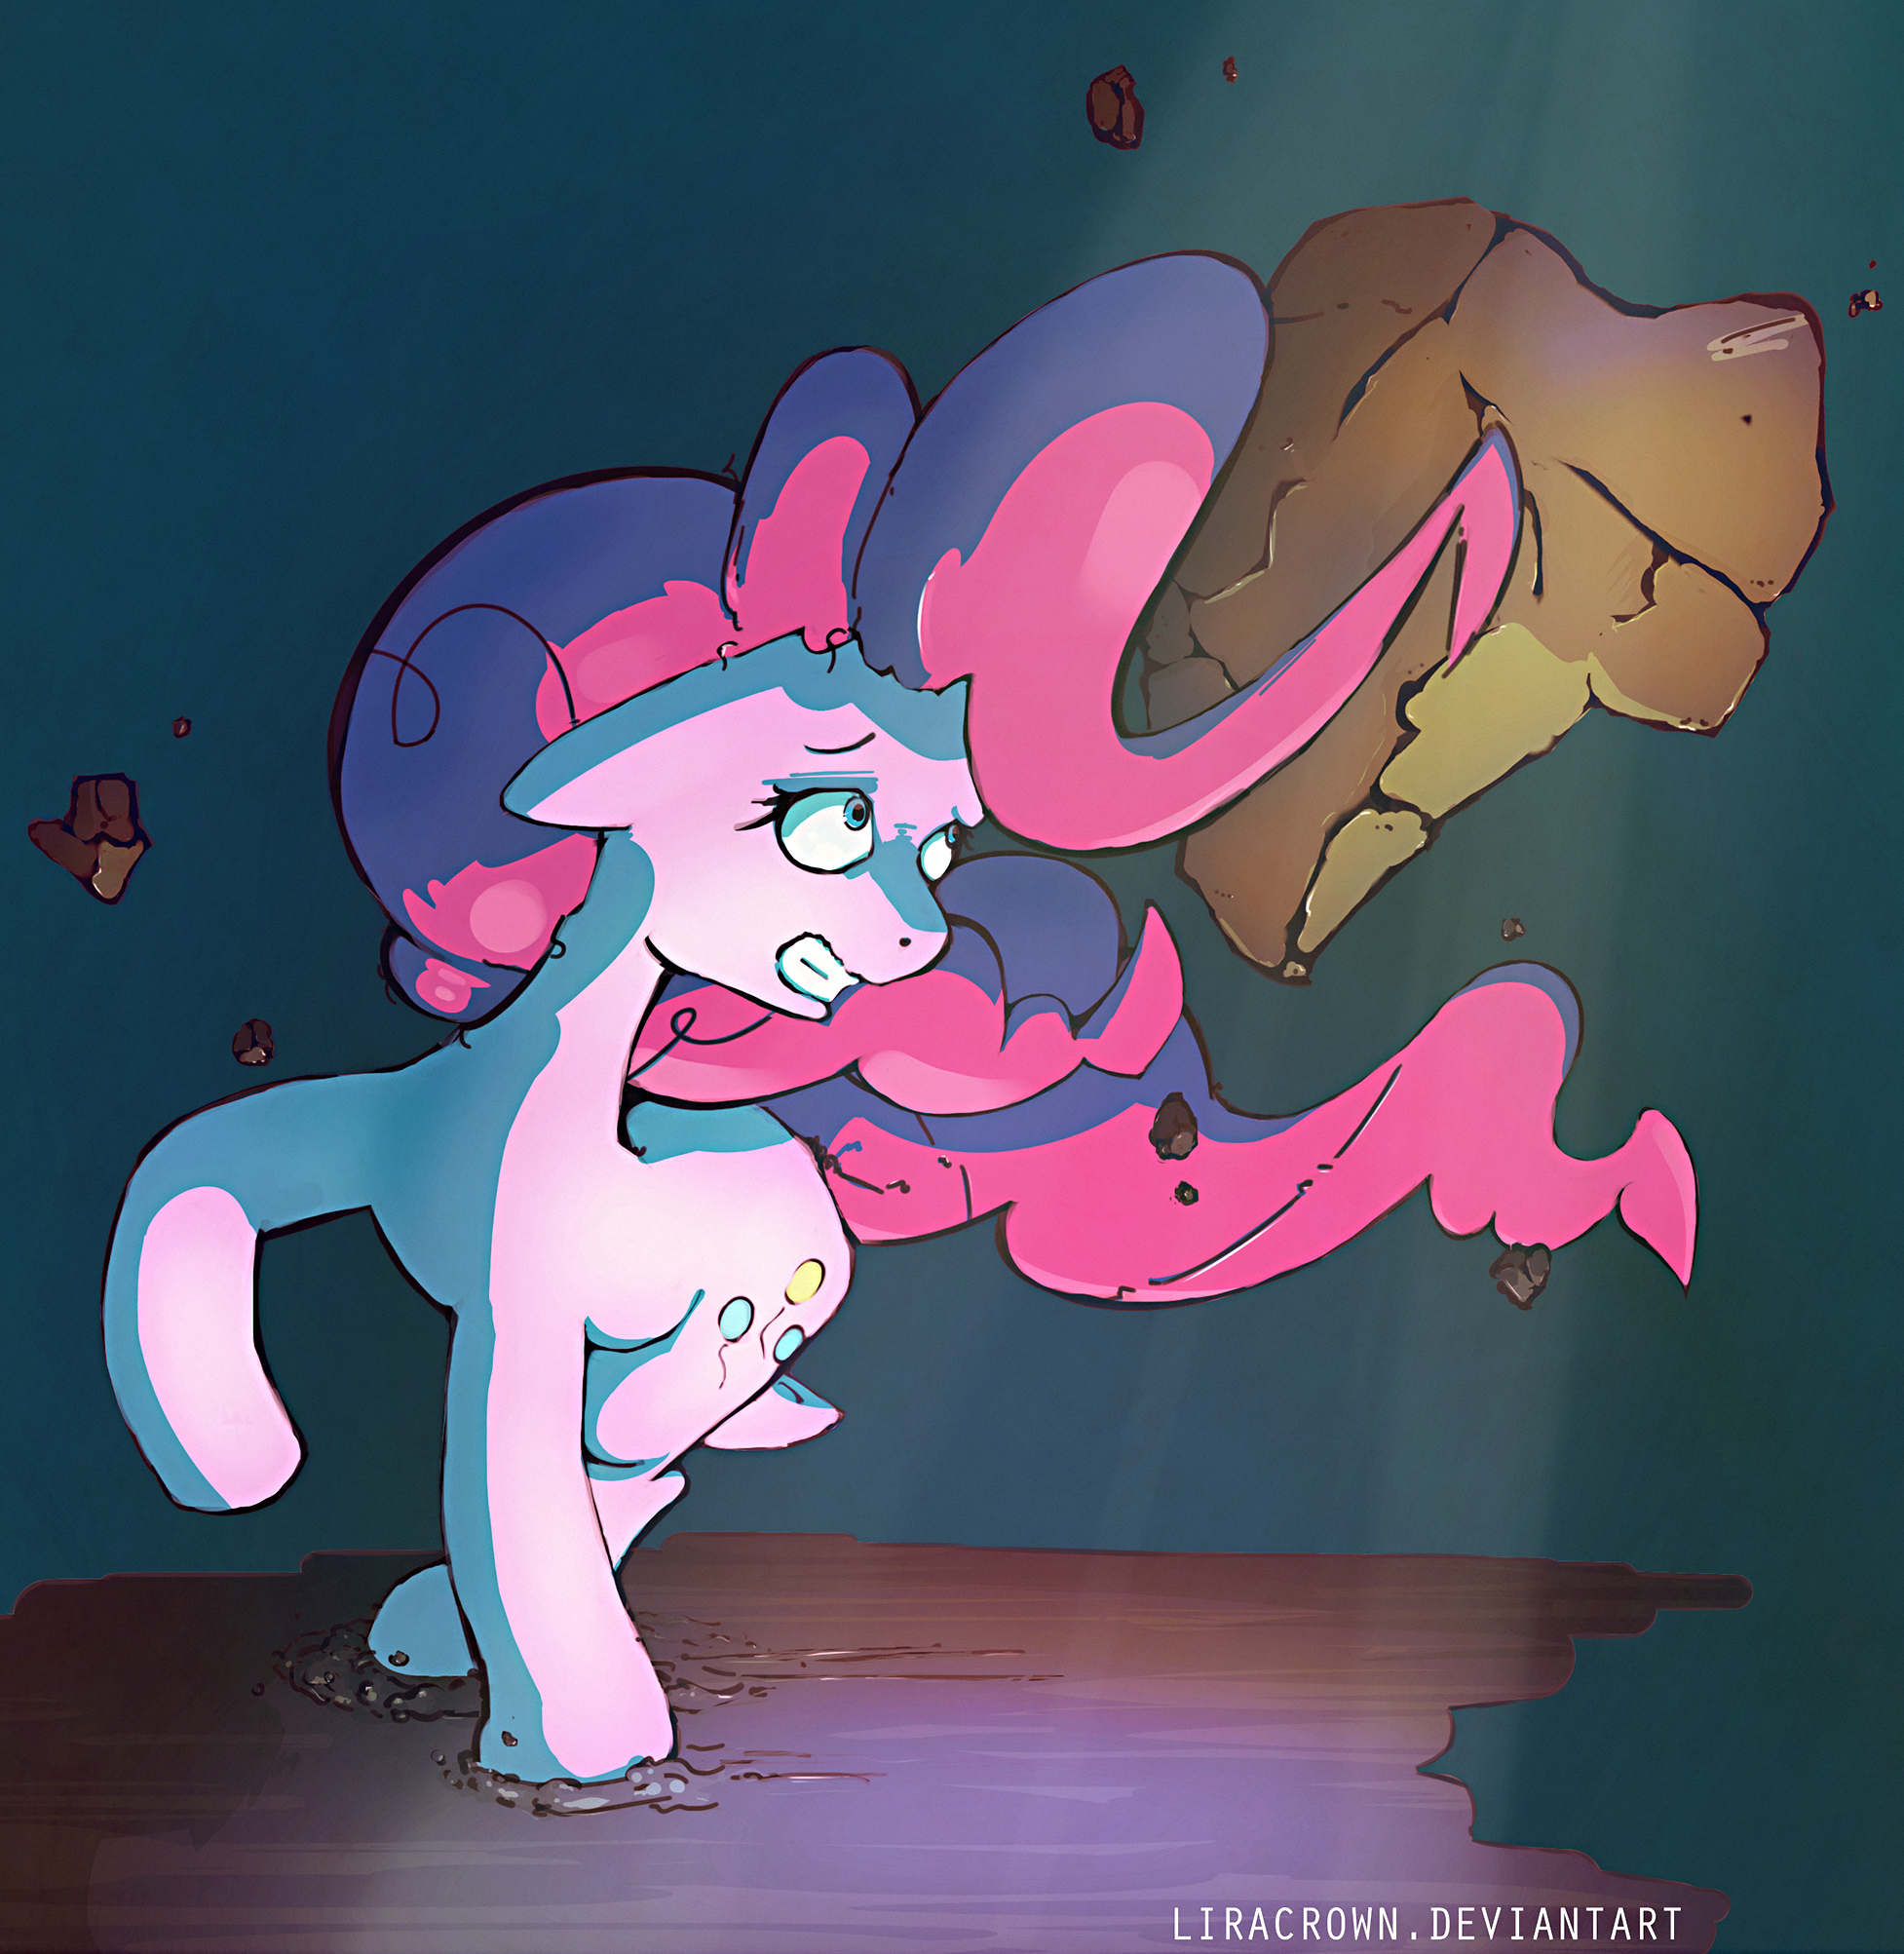 woops___colored_rough_by_liracrown-daroo